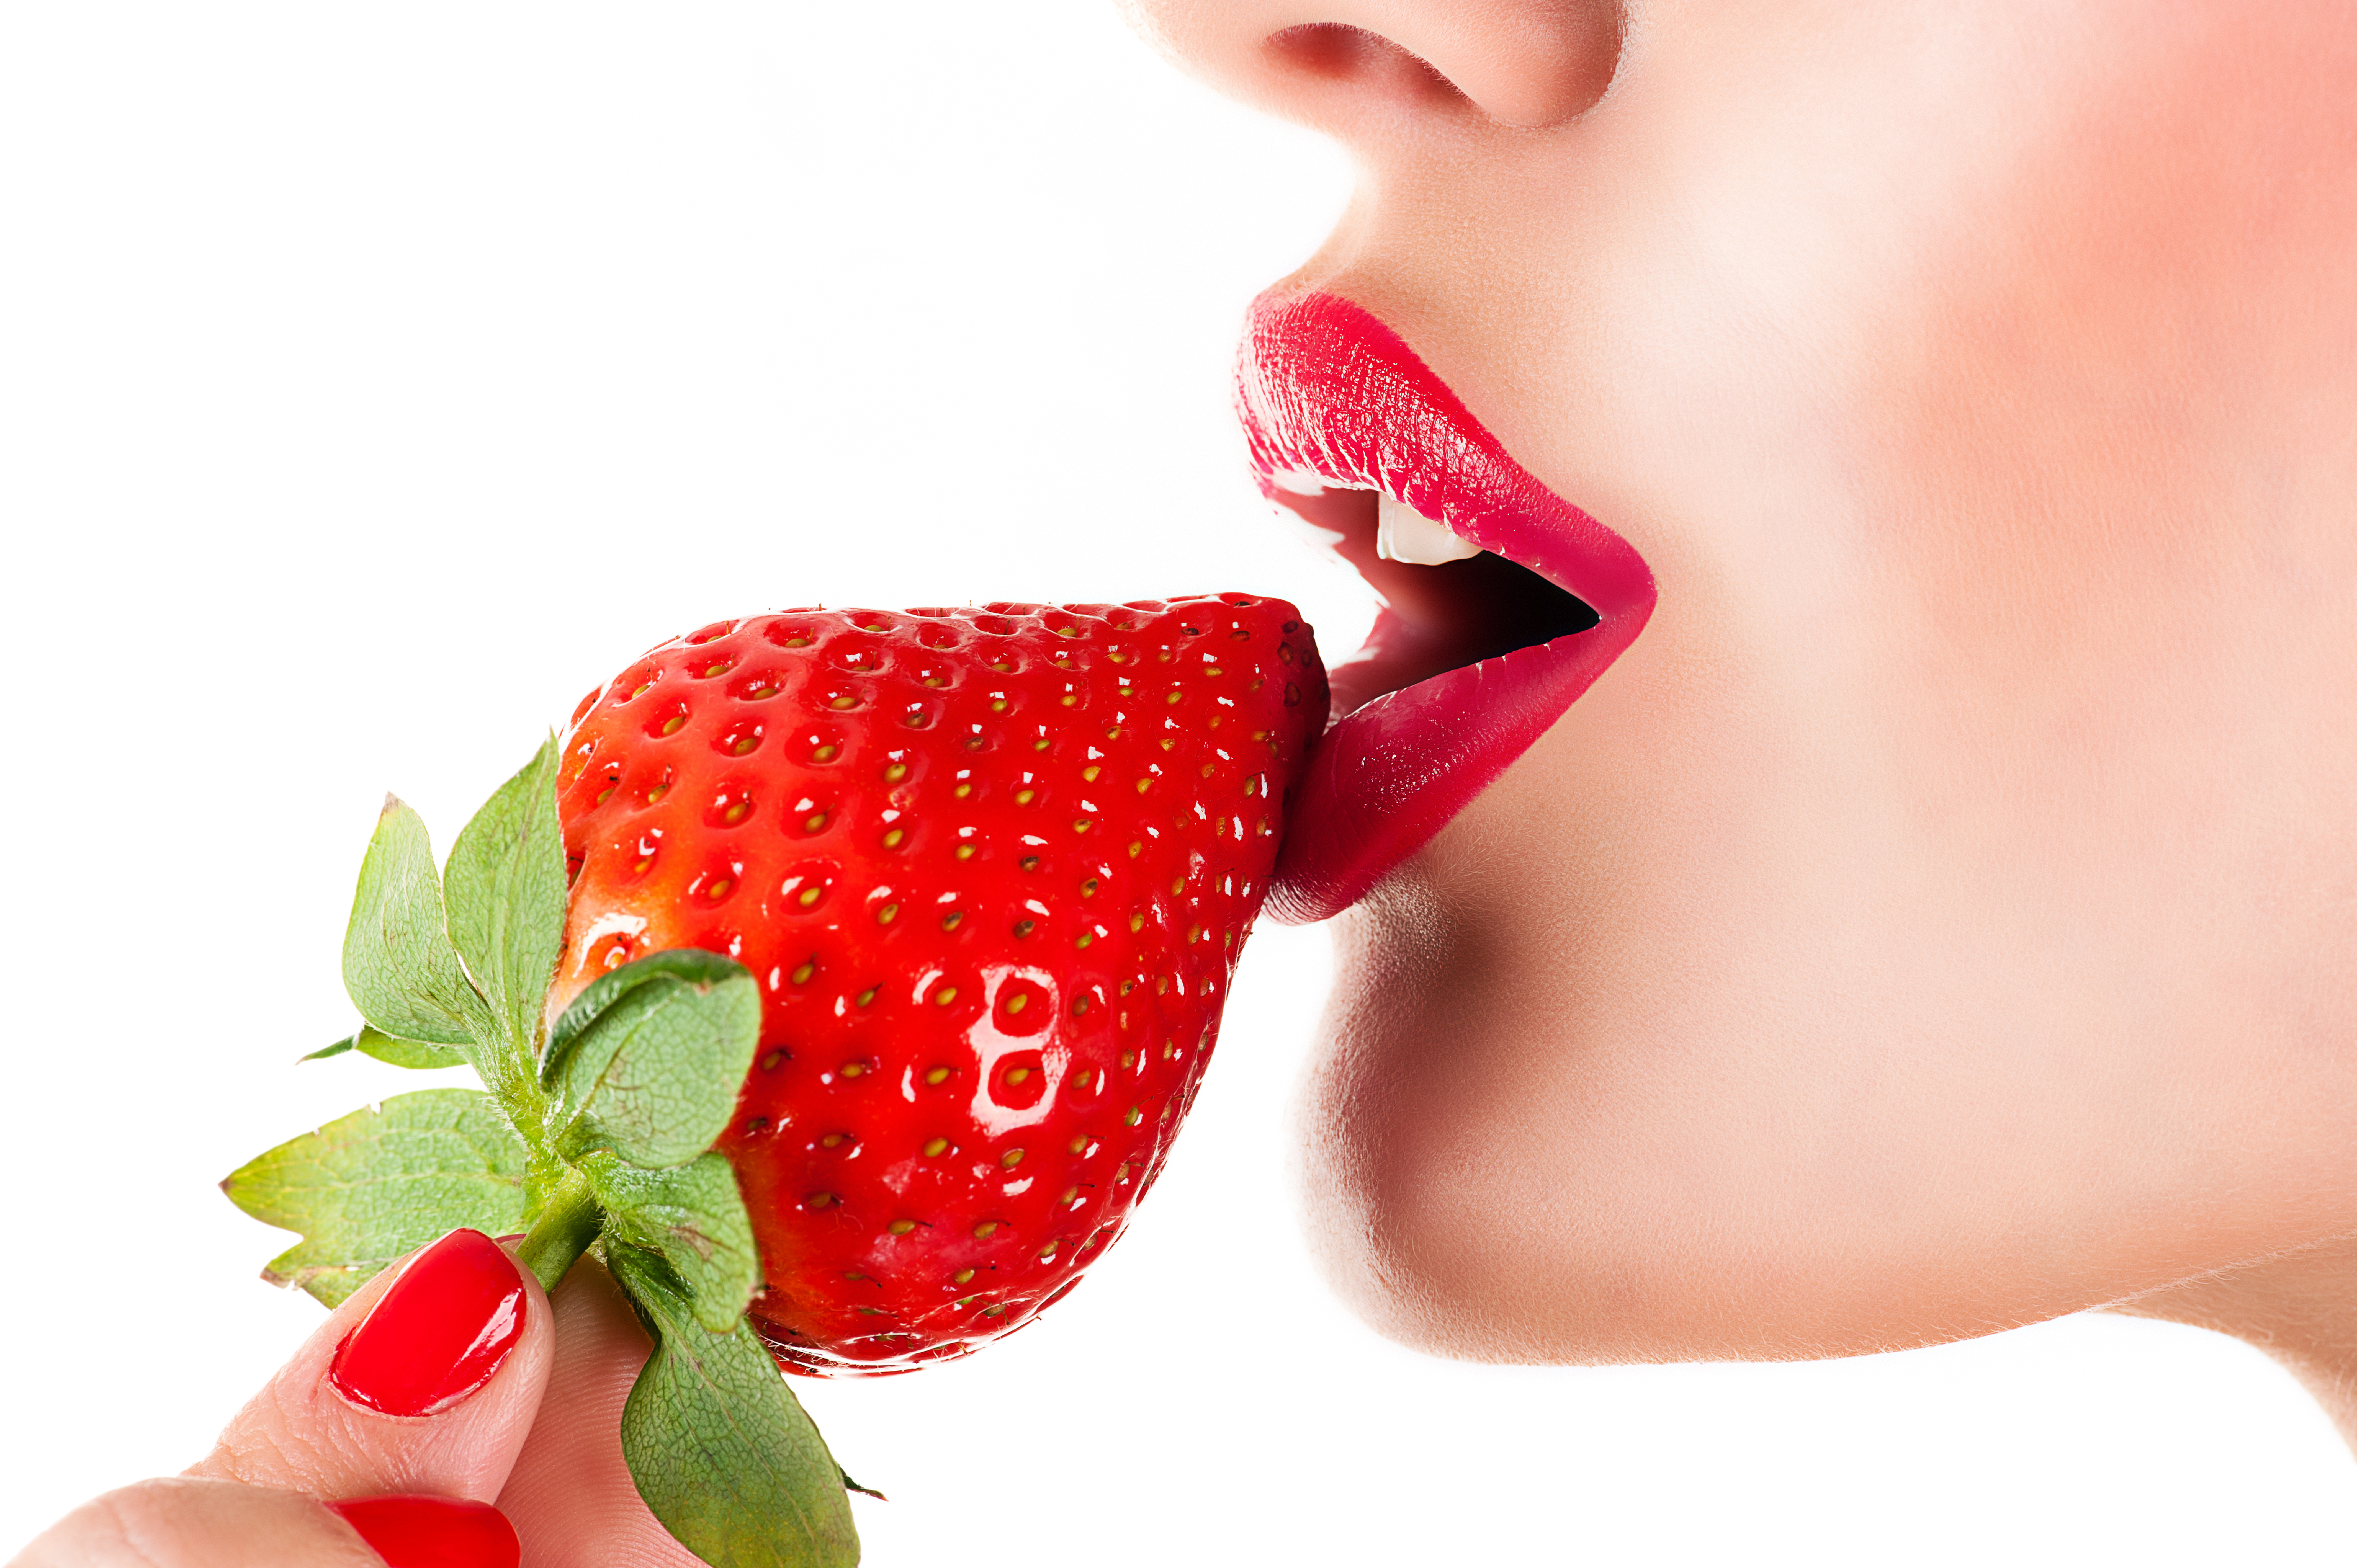 bj blast oral sex popping candy strawberry flavour